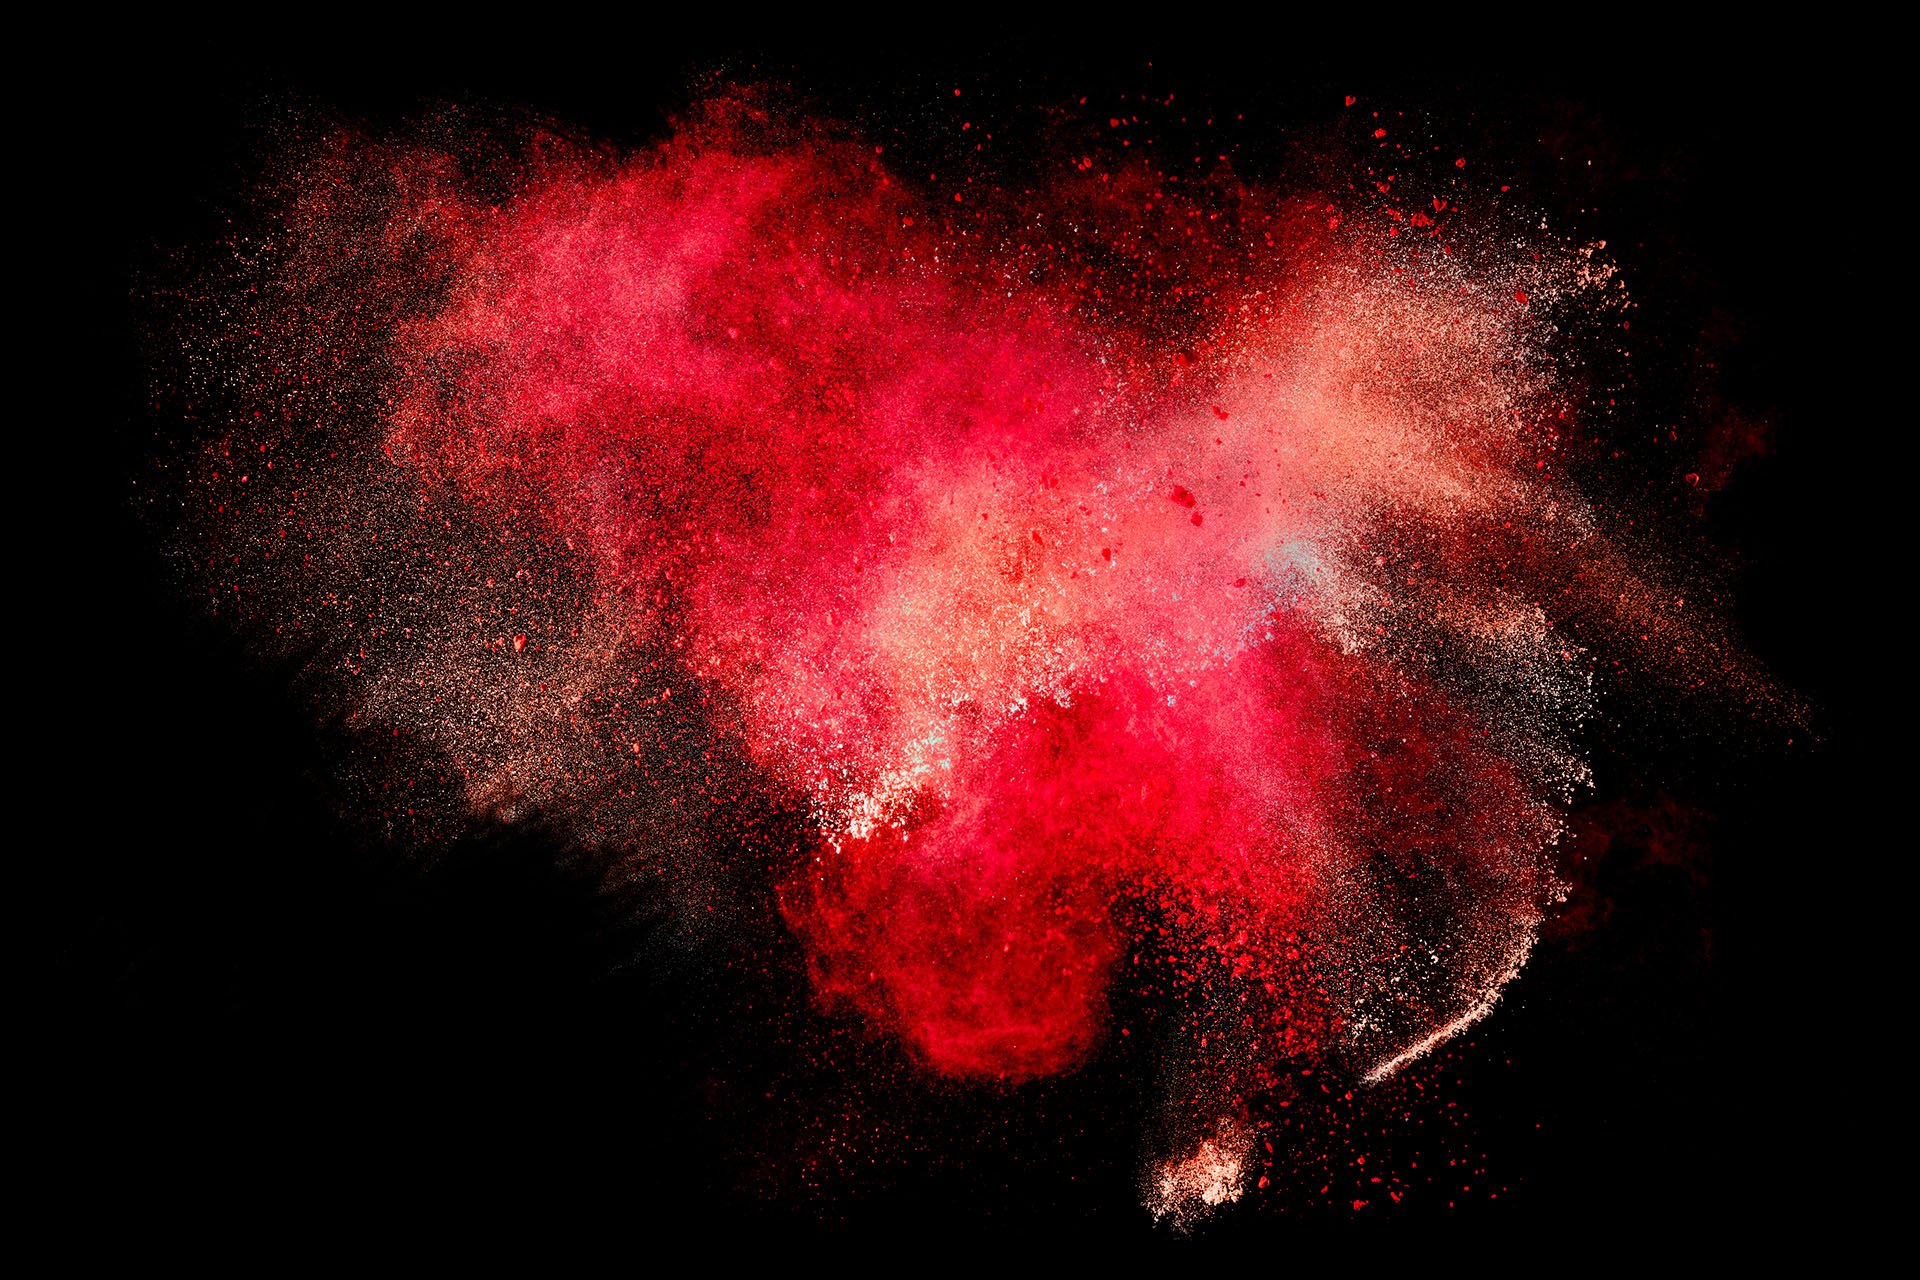 The image is a depiction of a red and black explosion, resembling fireworks or a nebula.